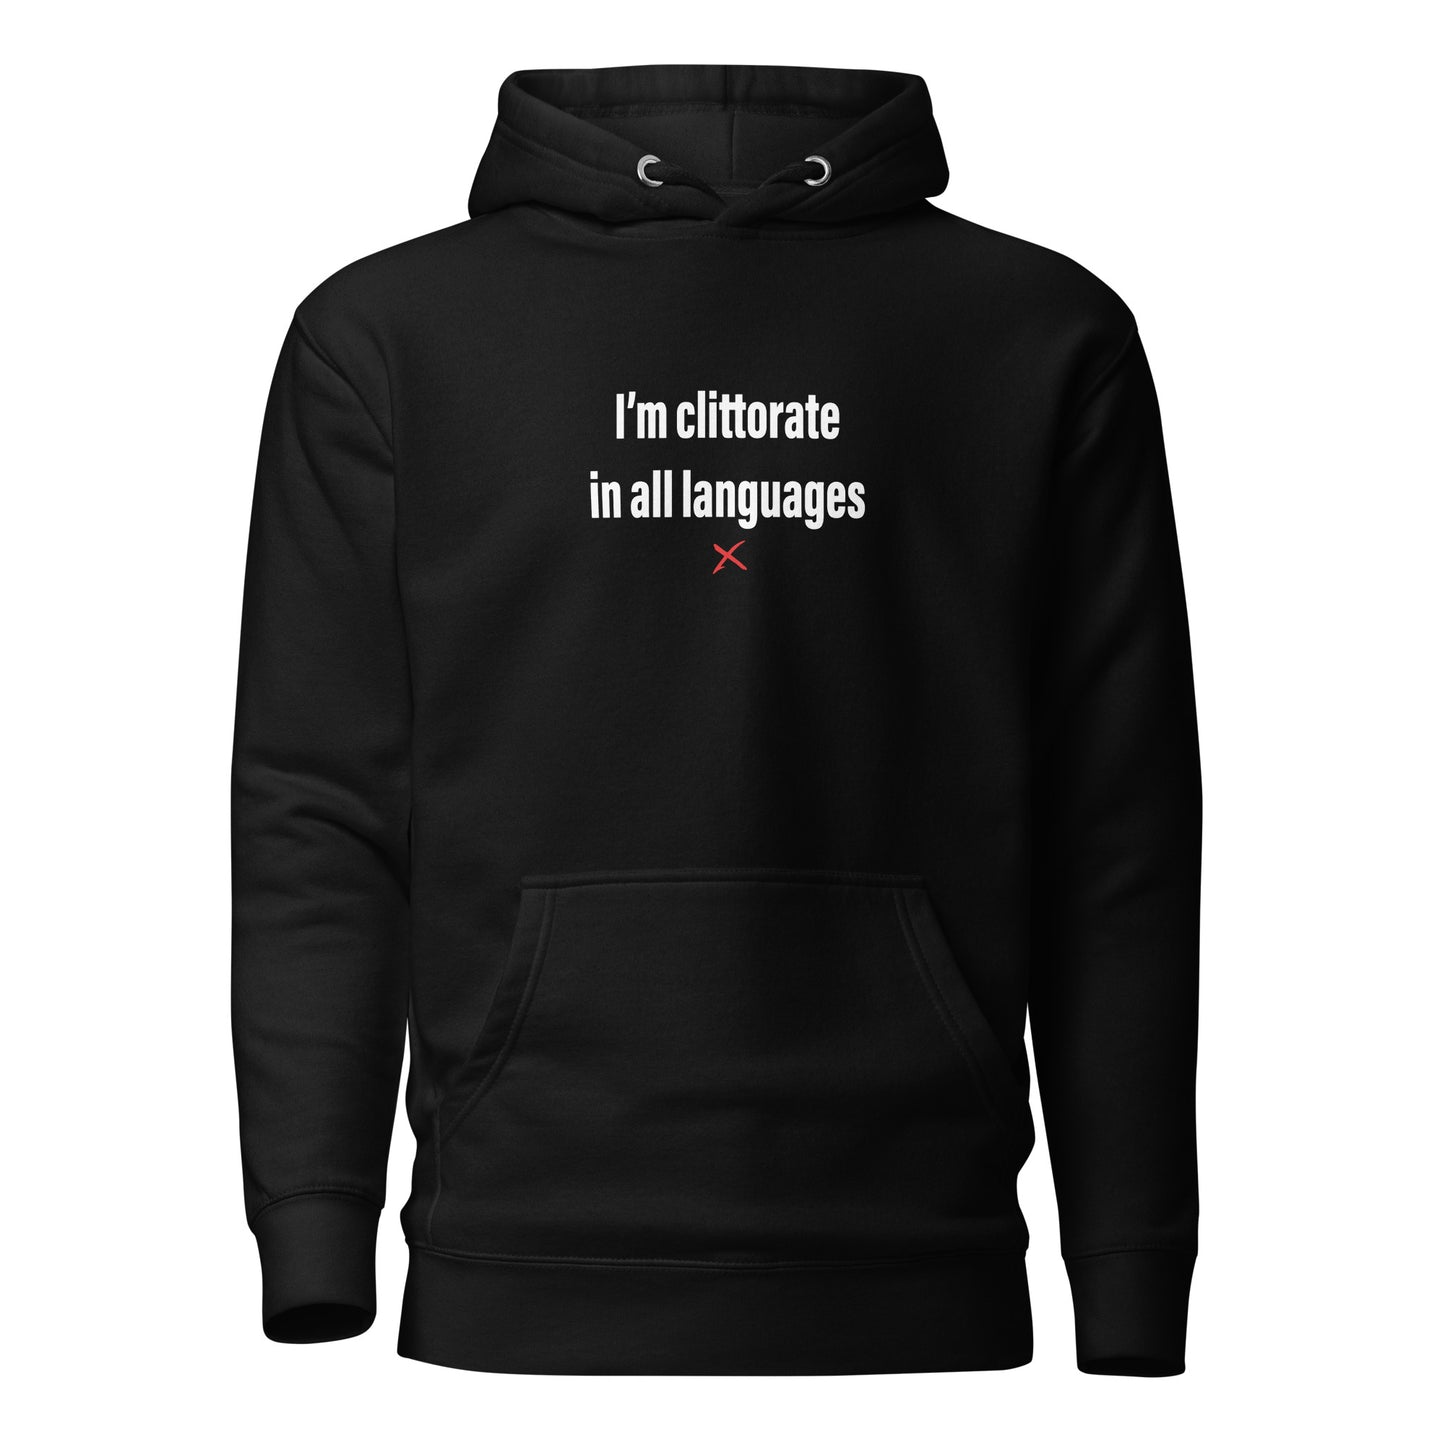 I'm clittorate in all languages - Hoodie